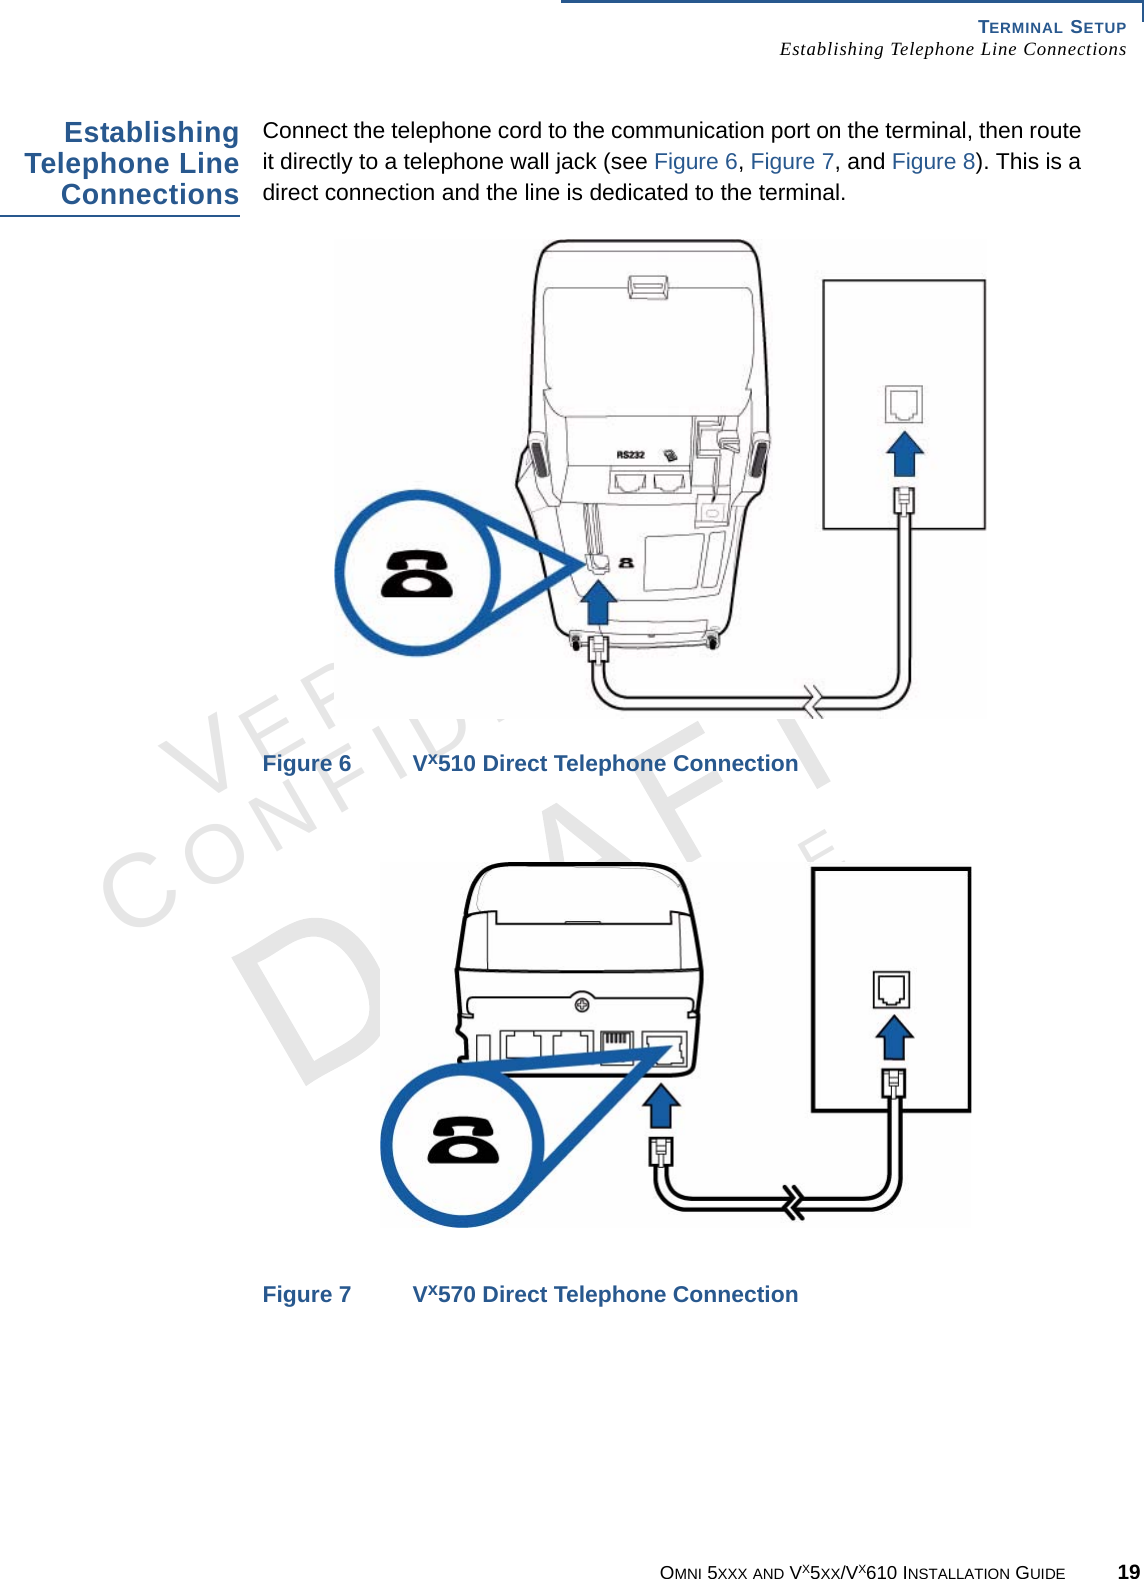 TERMINAL SETUPEstablishing Telephone Line ConnectionsOMNI 5XXX AND VX5XX/VX610 INSTALLATION GUIDE 19VERIFONECONFIDENTIALTEMPLATE REV E EstablishingTelephone LineConnectionsConnect the telephone cord to the communication port on the terminal, then route it directly to a telephone wall jack (see Figure 6, Figure 7, and Figure 8). This is a direct connection and the line is dedicated to the terminal.Figure 6 Vx510 Direct Telephone ConnectionFigure 7 Vx570 Direct Telephone Connection